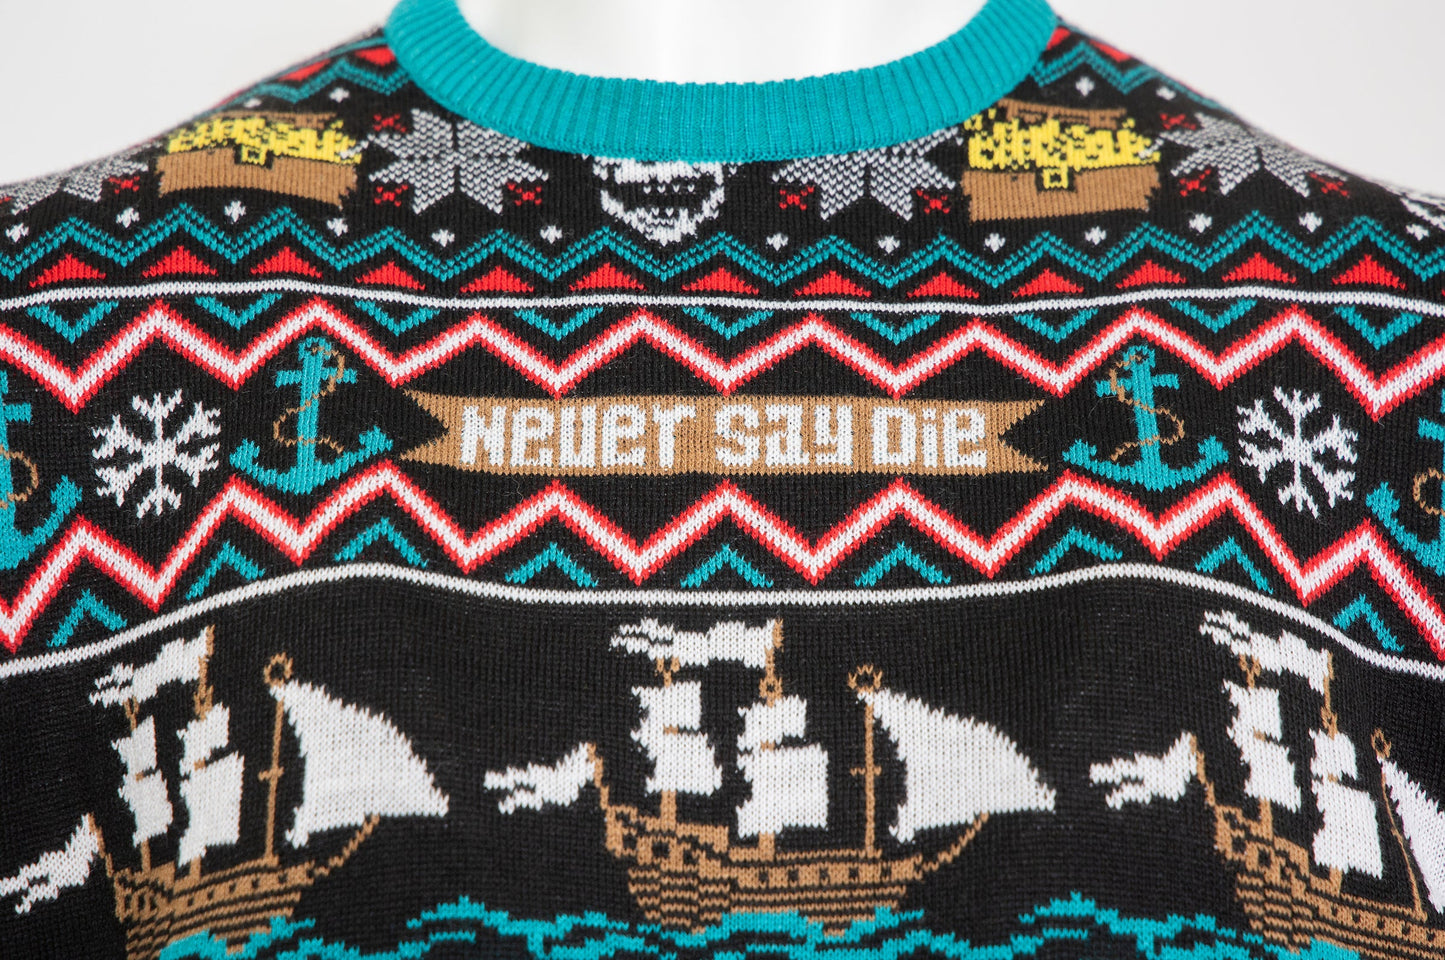 The Goonies Christmas Sweater - PRE-ORDER